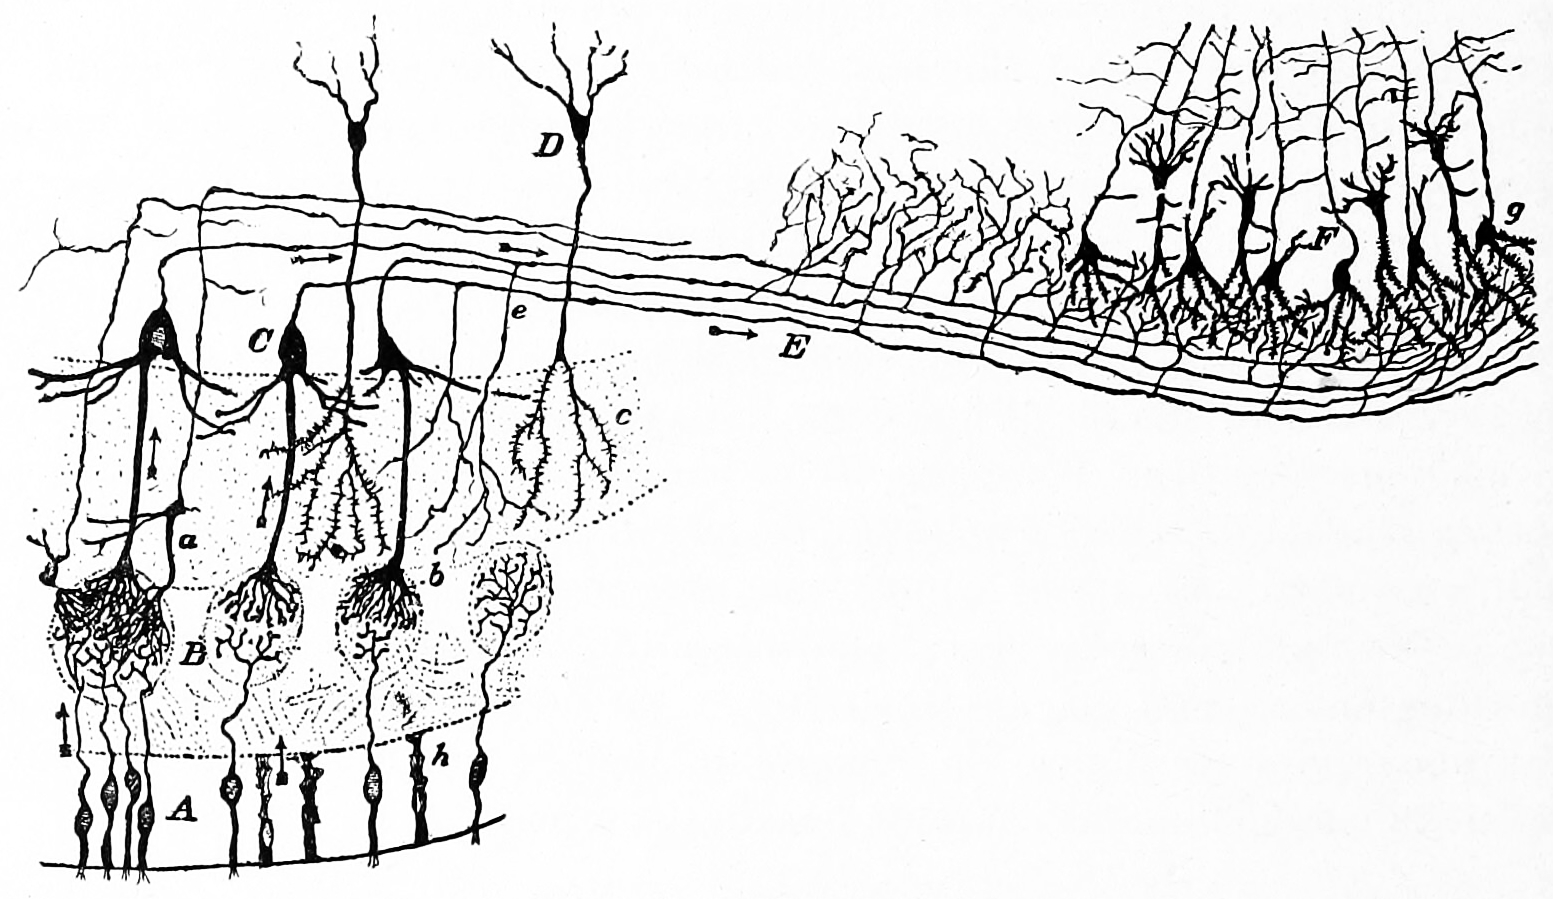 Diagram of the structure of the olfactory bulb and olfactory cortex. A) Olfacory mucosa; B) glomeruli in the olfactory bulb; C) mitral cells; D) granule cells; E) olfactory nerve; F) pyramidal cells in the olfactory cortex. Action potentials fired by the olfactory receptor cells and subsequently by the cells in the olfactory bulb, travel to the olfactory cortex (arrows). Histologie du système nerveux de l’homme & des vertébrés, Tome Premier (1909) by Santiago Ramón y Cajal translated from Spanish by Dr. L. Azoulay.